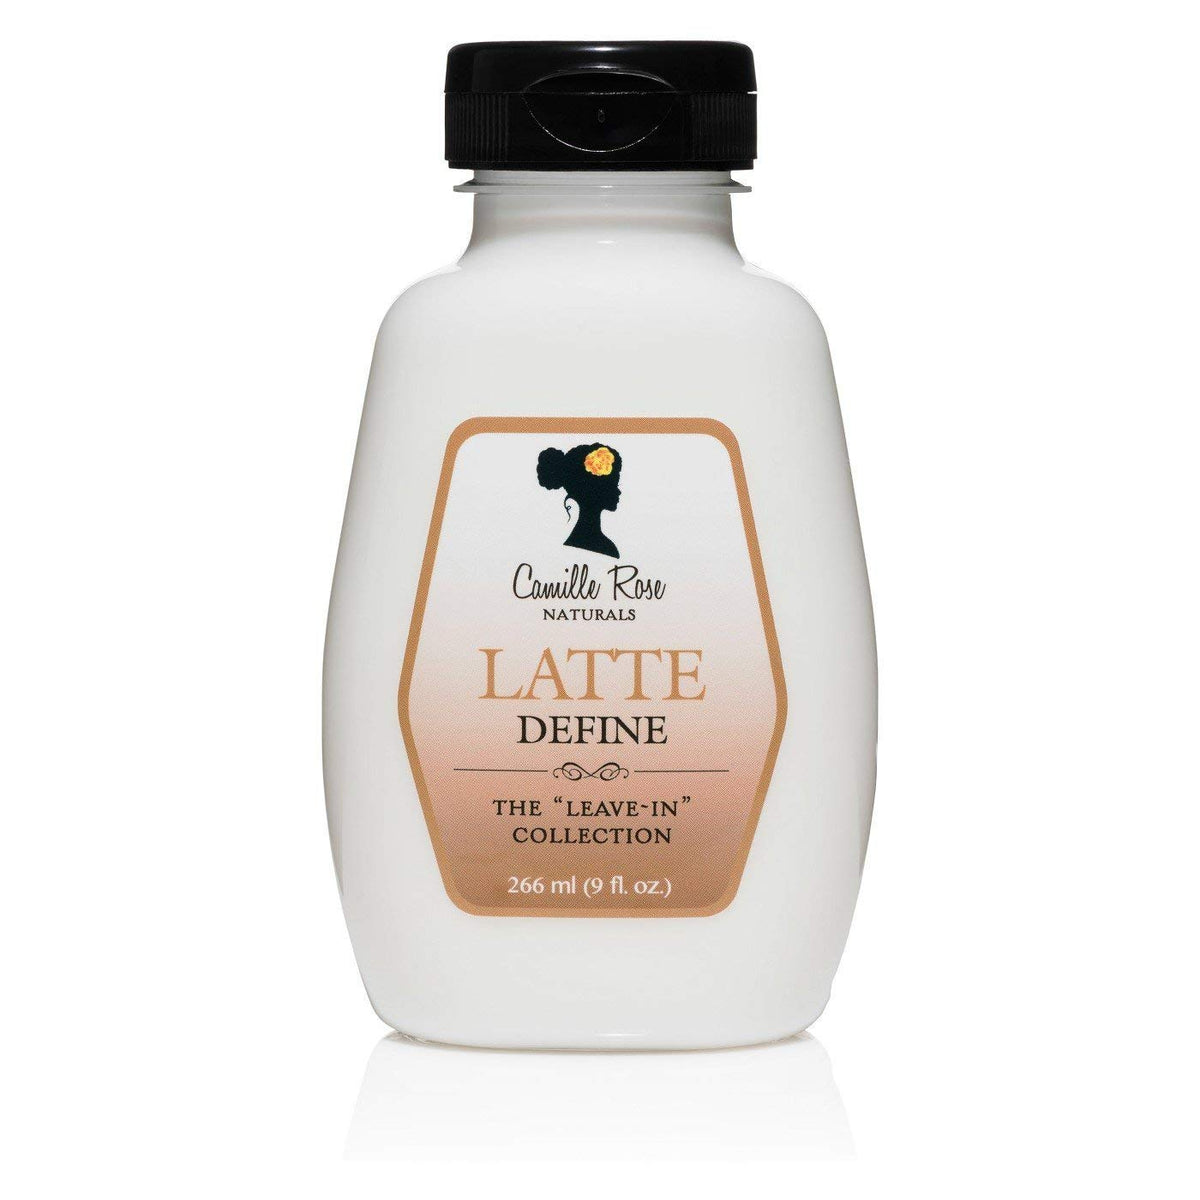 Camille Rose Naturals Latte Define Leave-in Collections 266ml